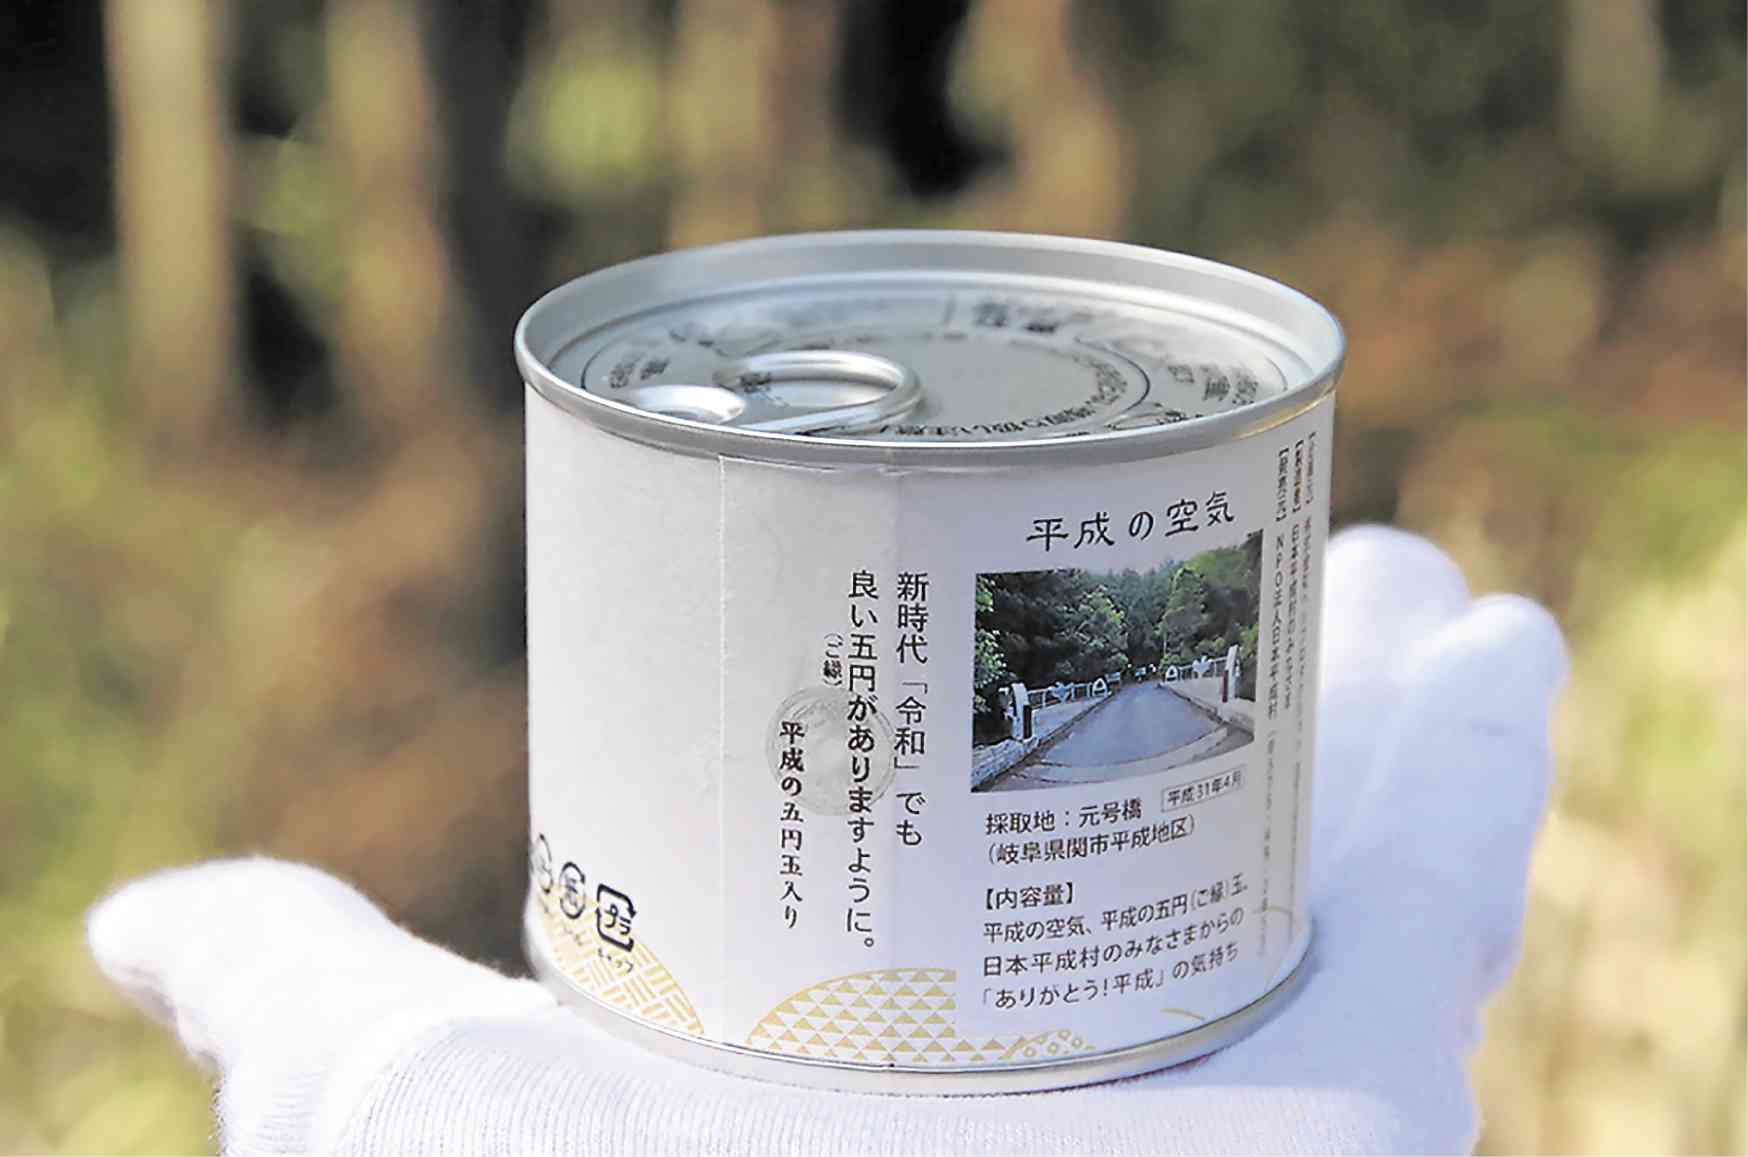 Japanese company sells canned air